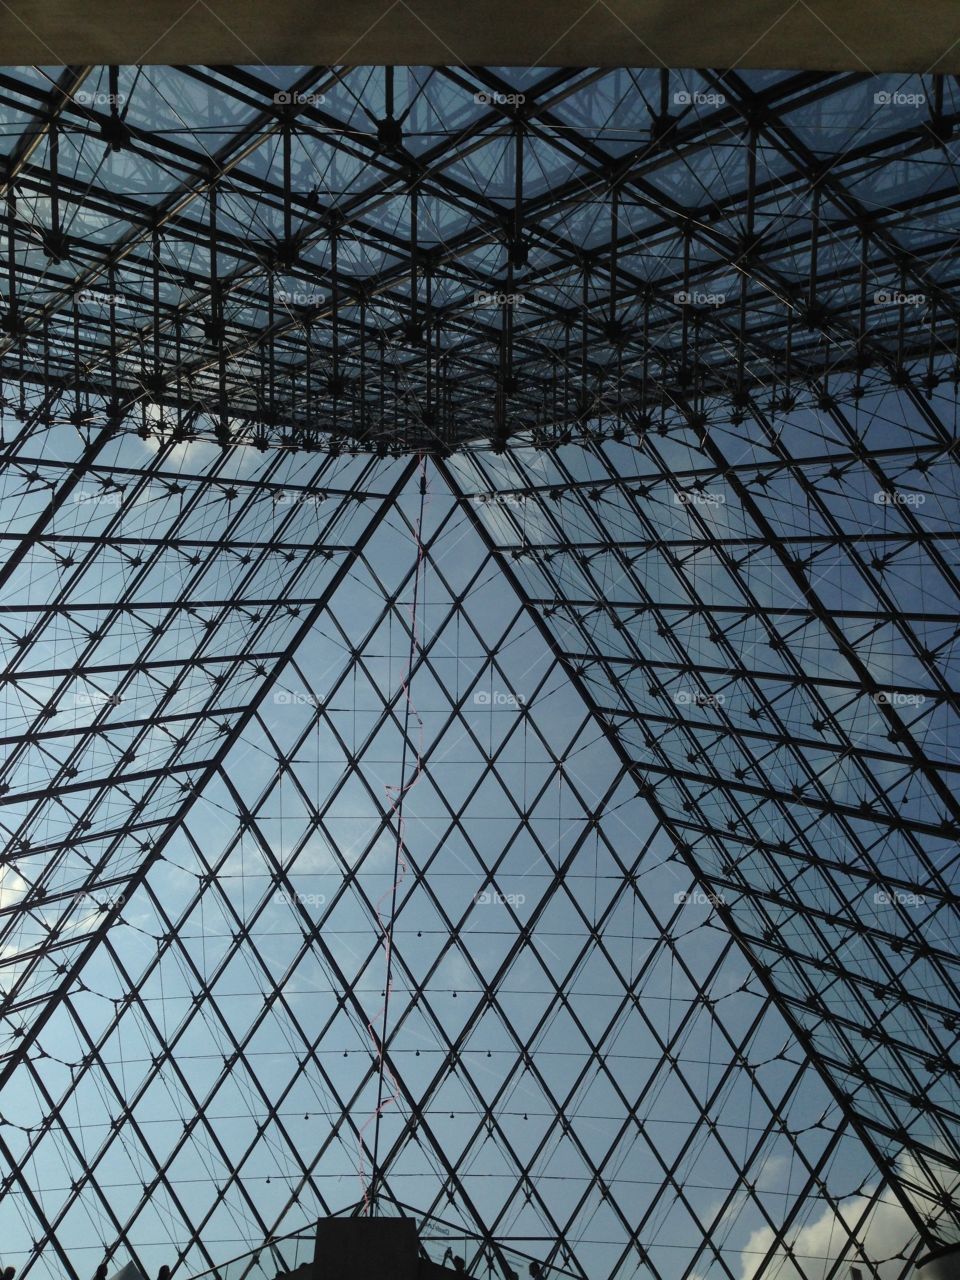 Louvre pyramid from below